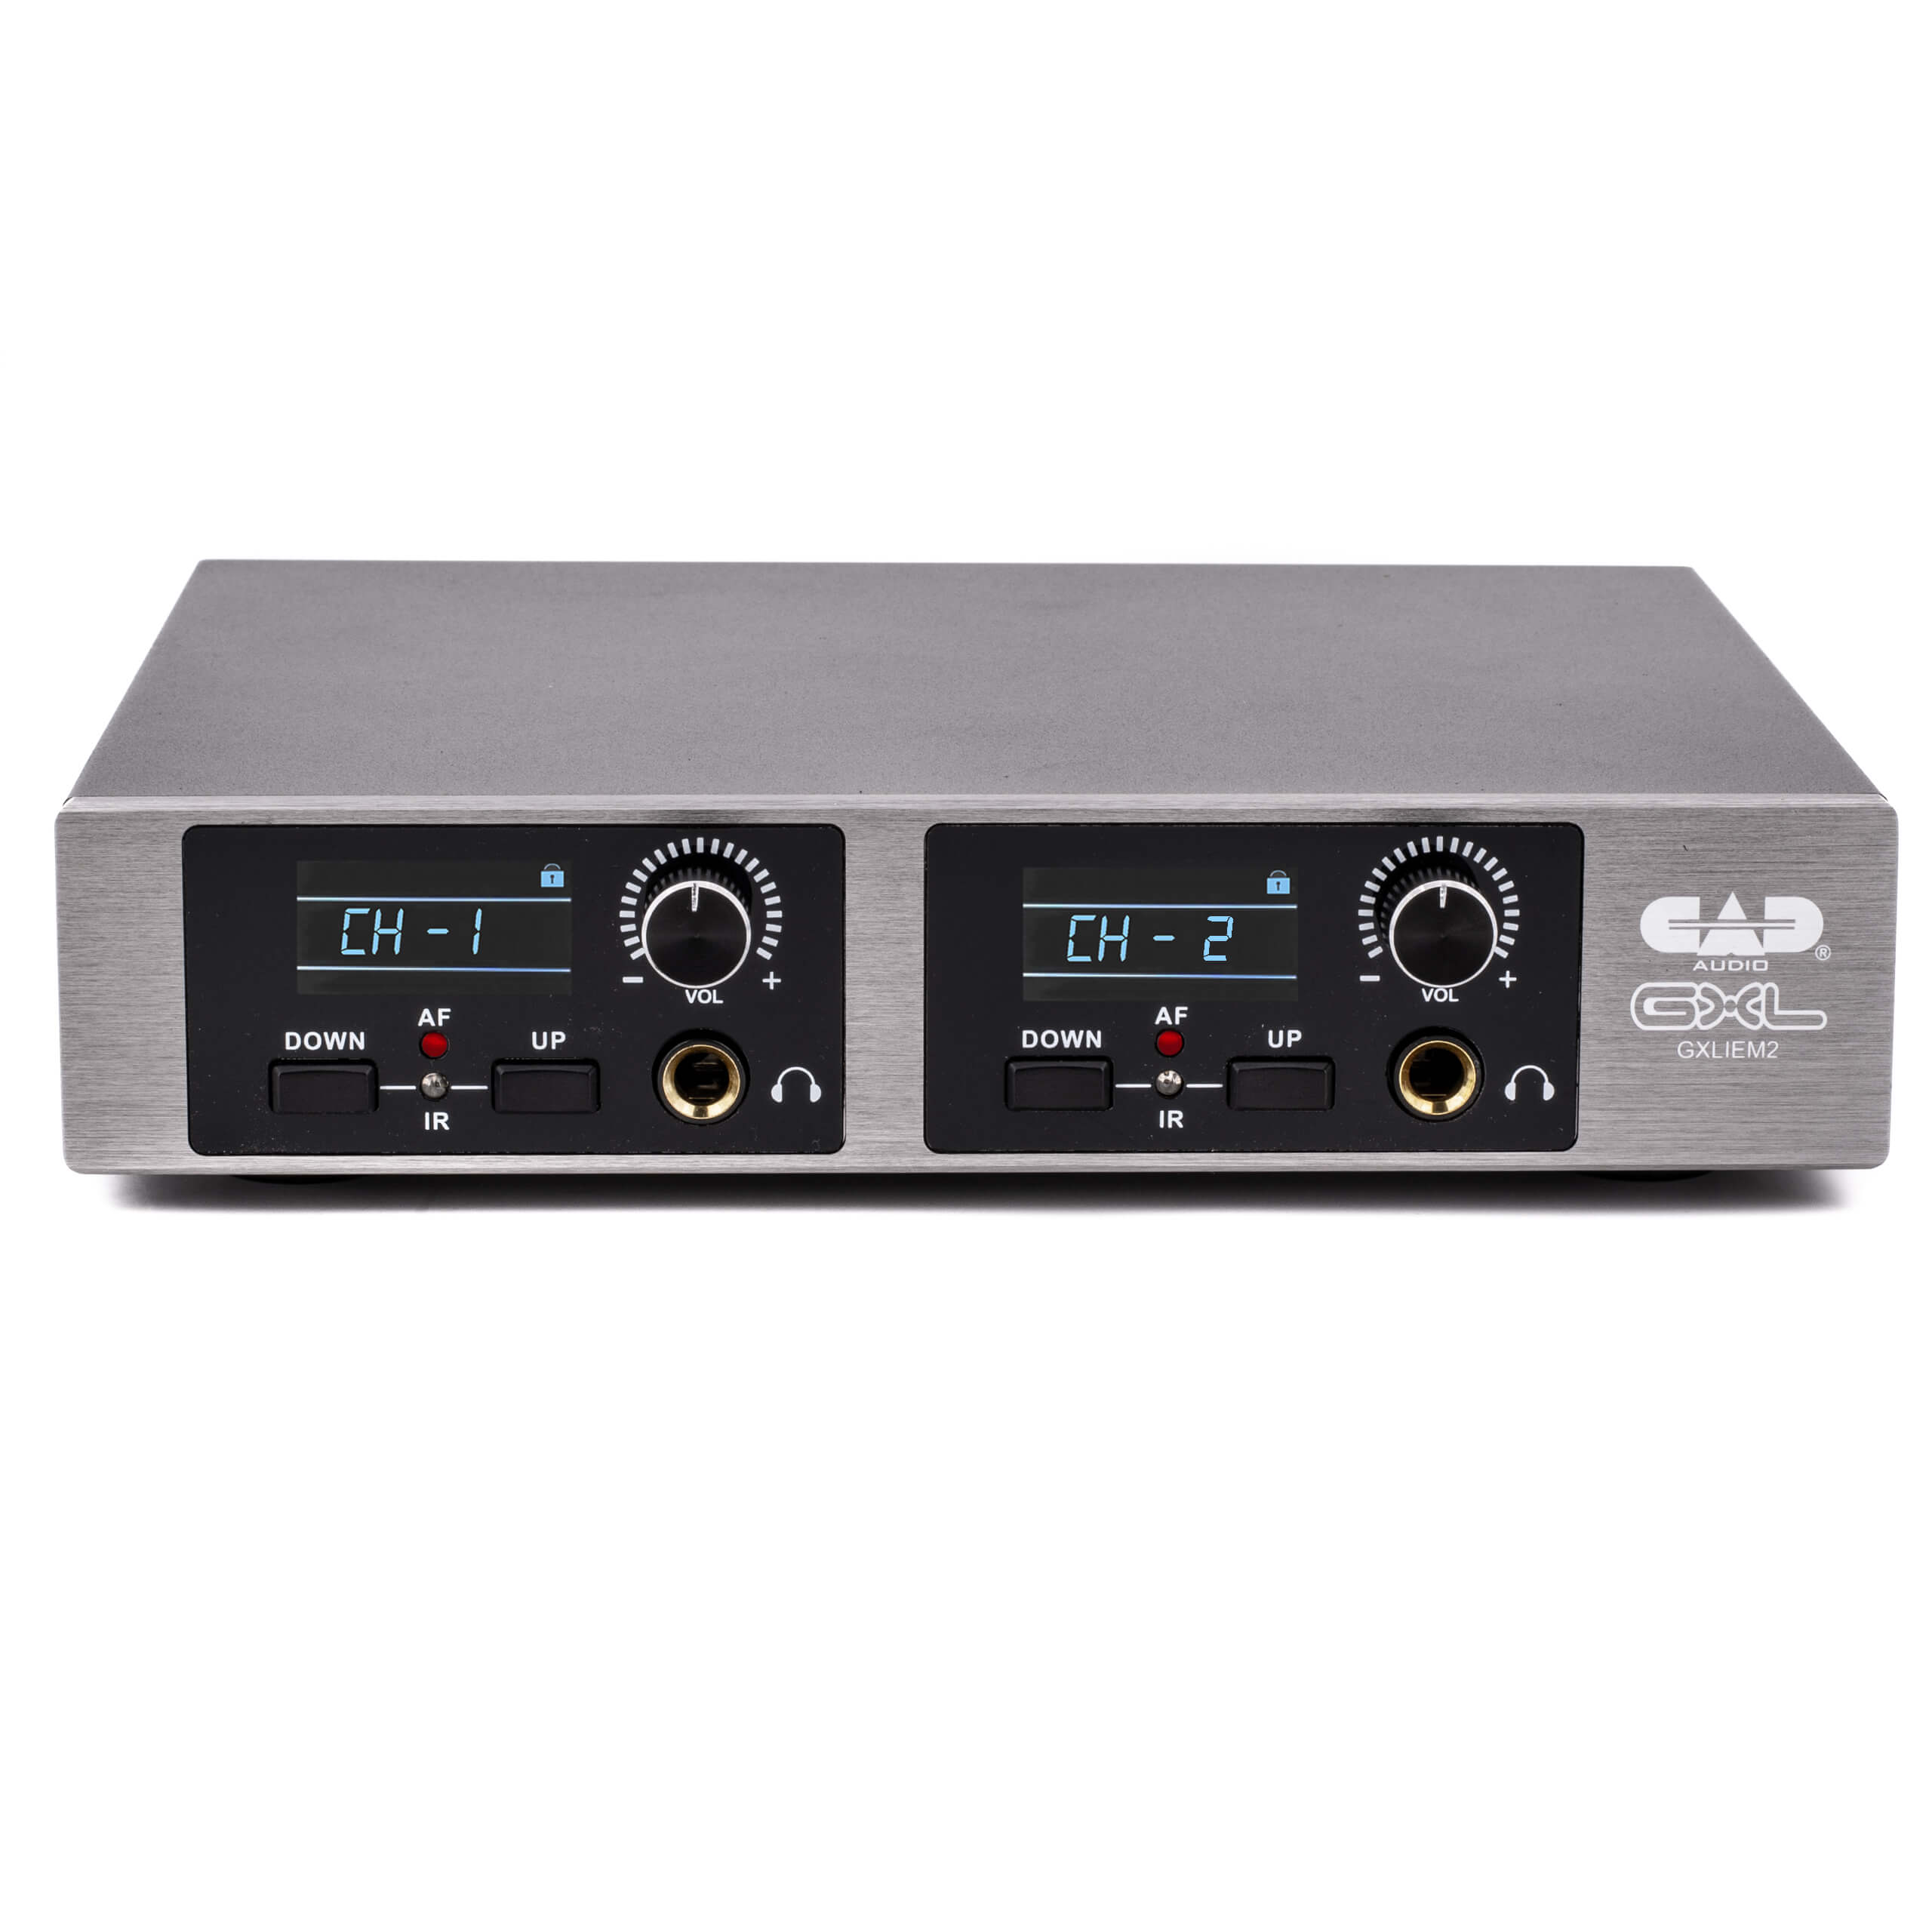 CAD Audio GXLIEM2 - Dual Mix 900 MHz Wireless In-Ear Monitor System, transmitter front